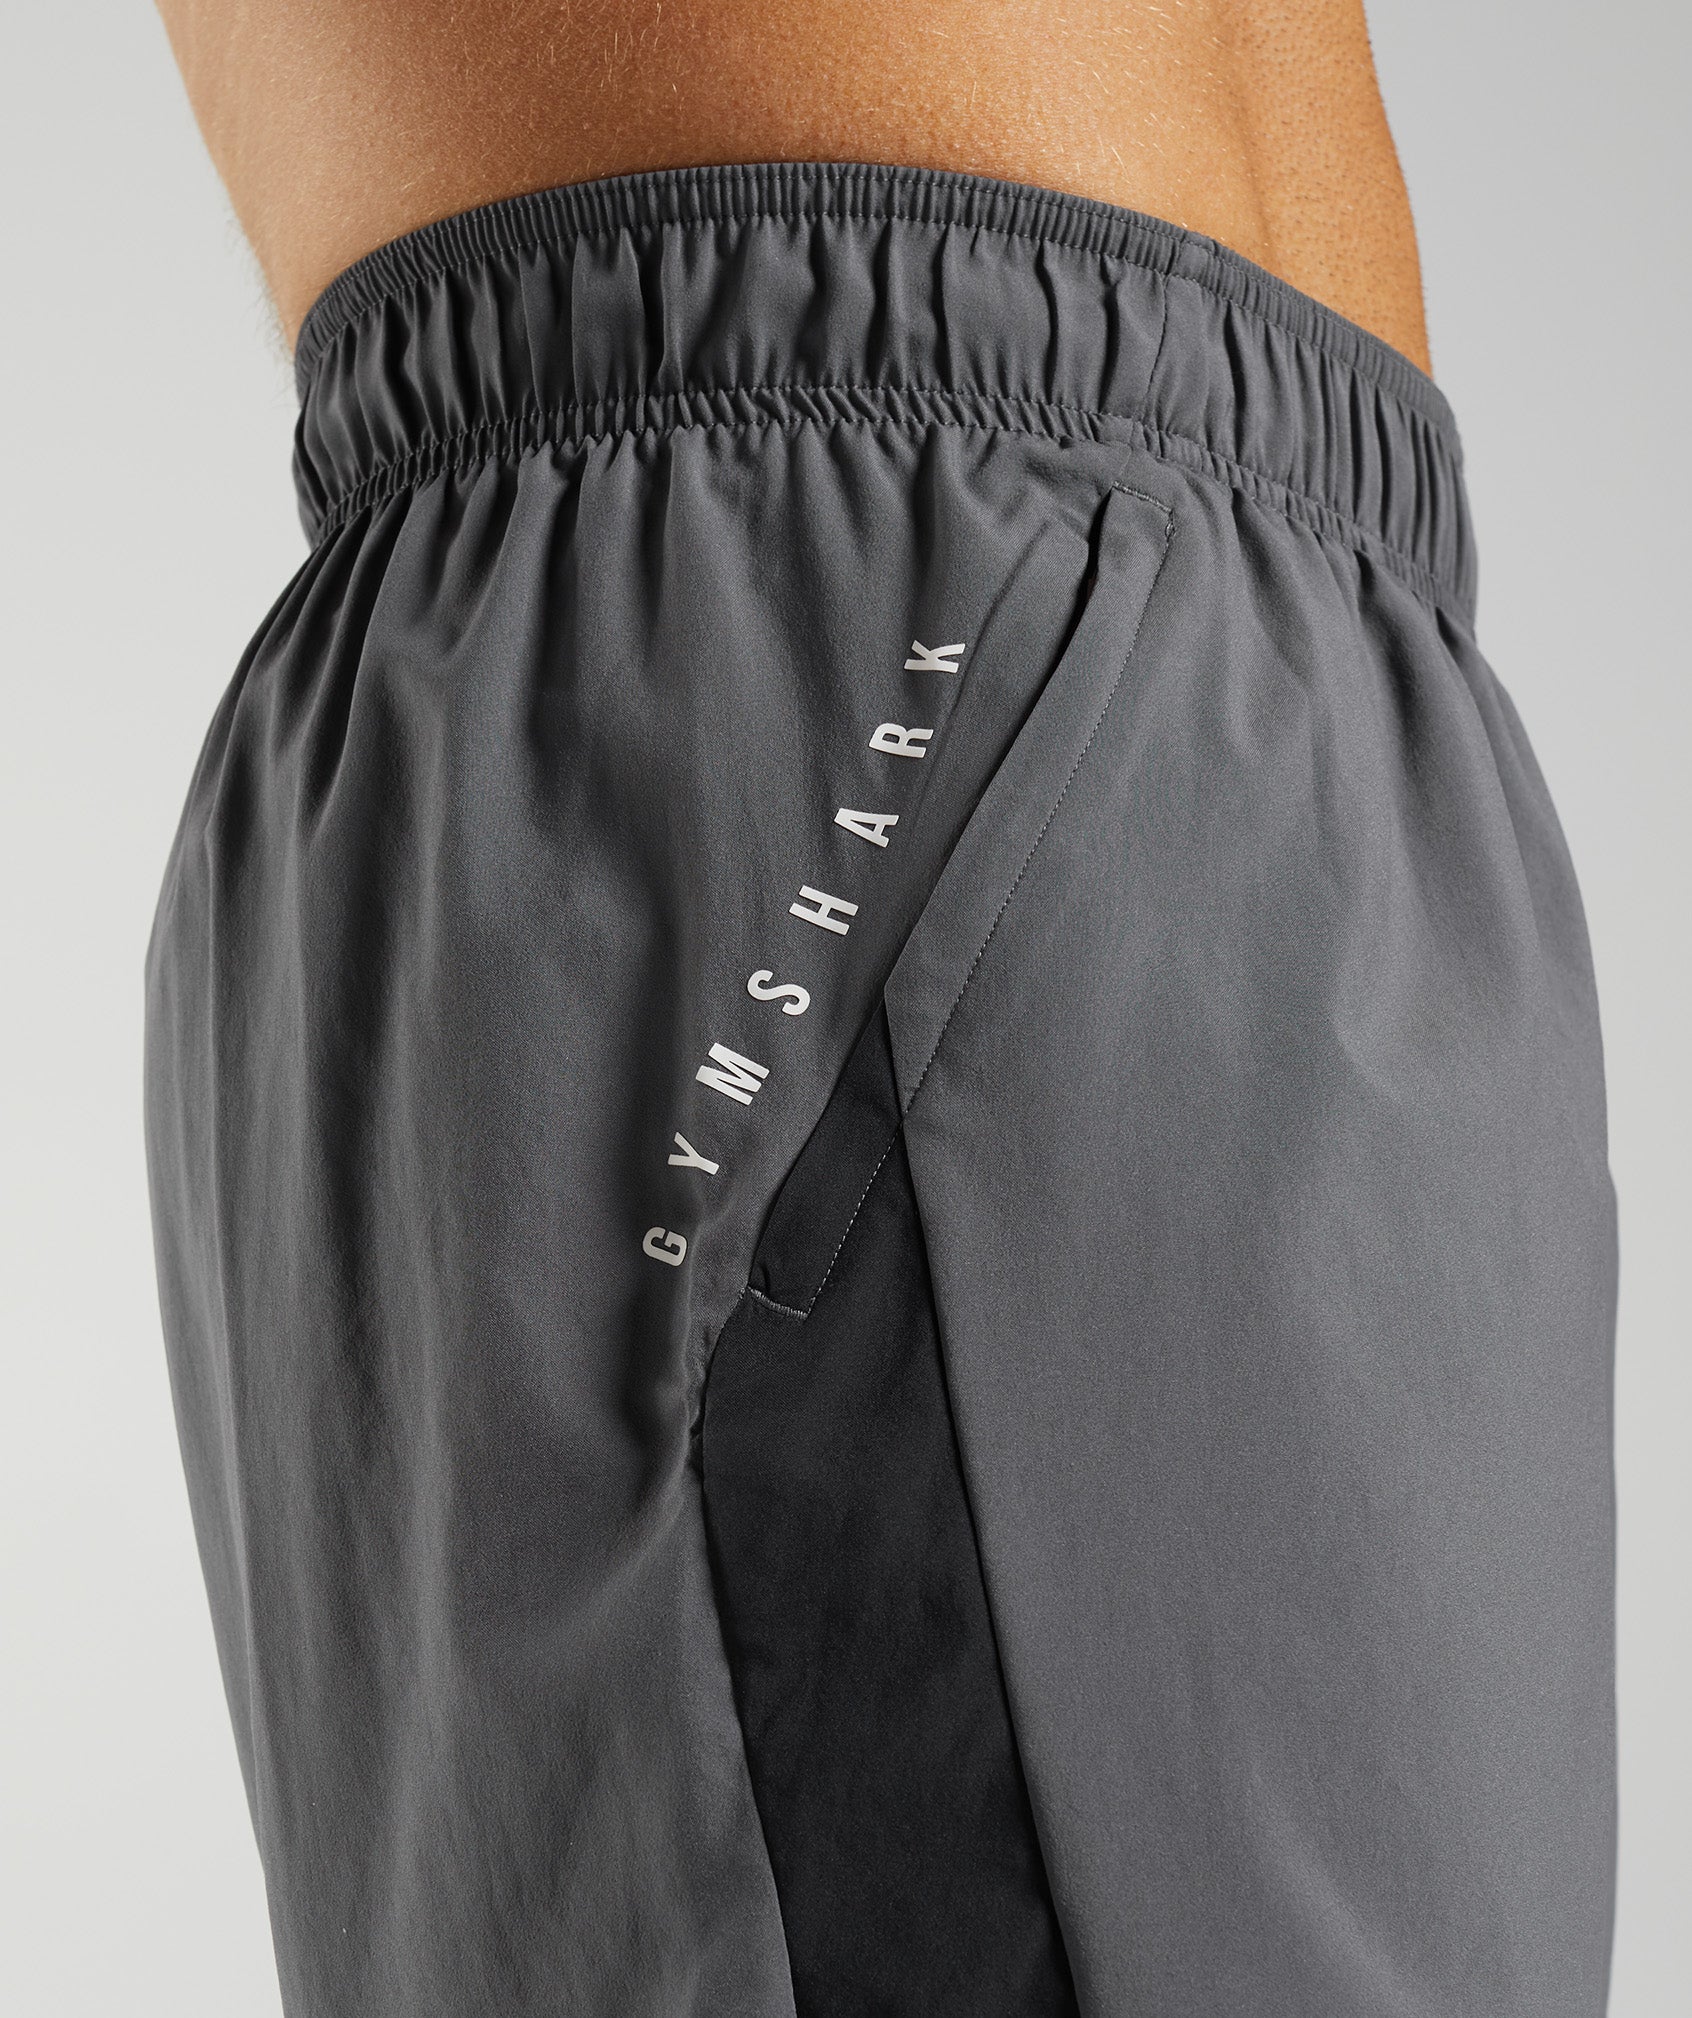 Sport Shorts in Silhouette Grey/Black - view 6